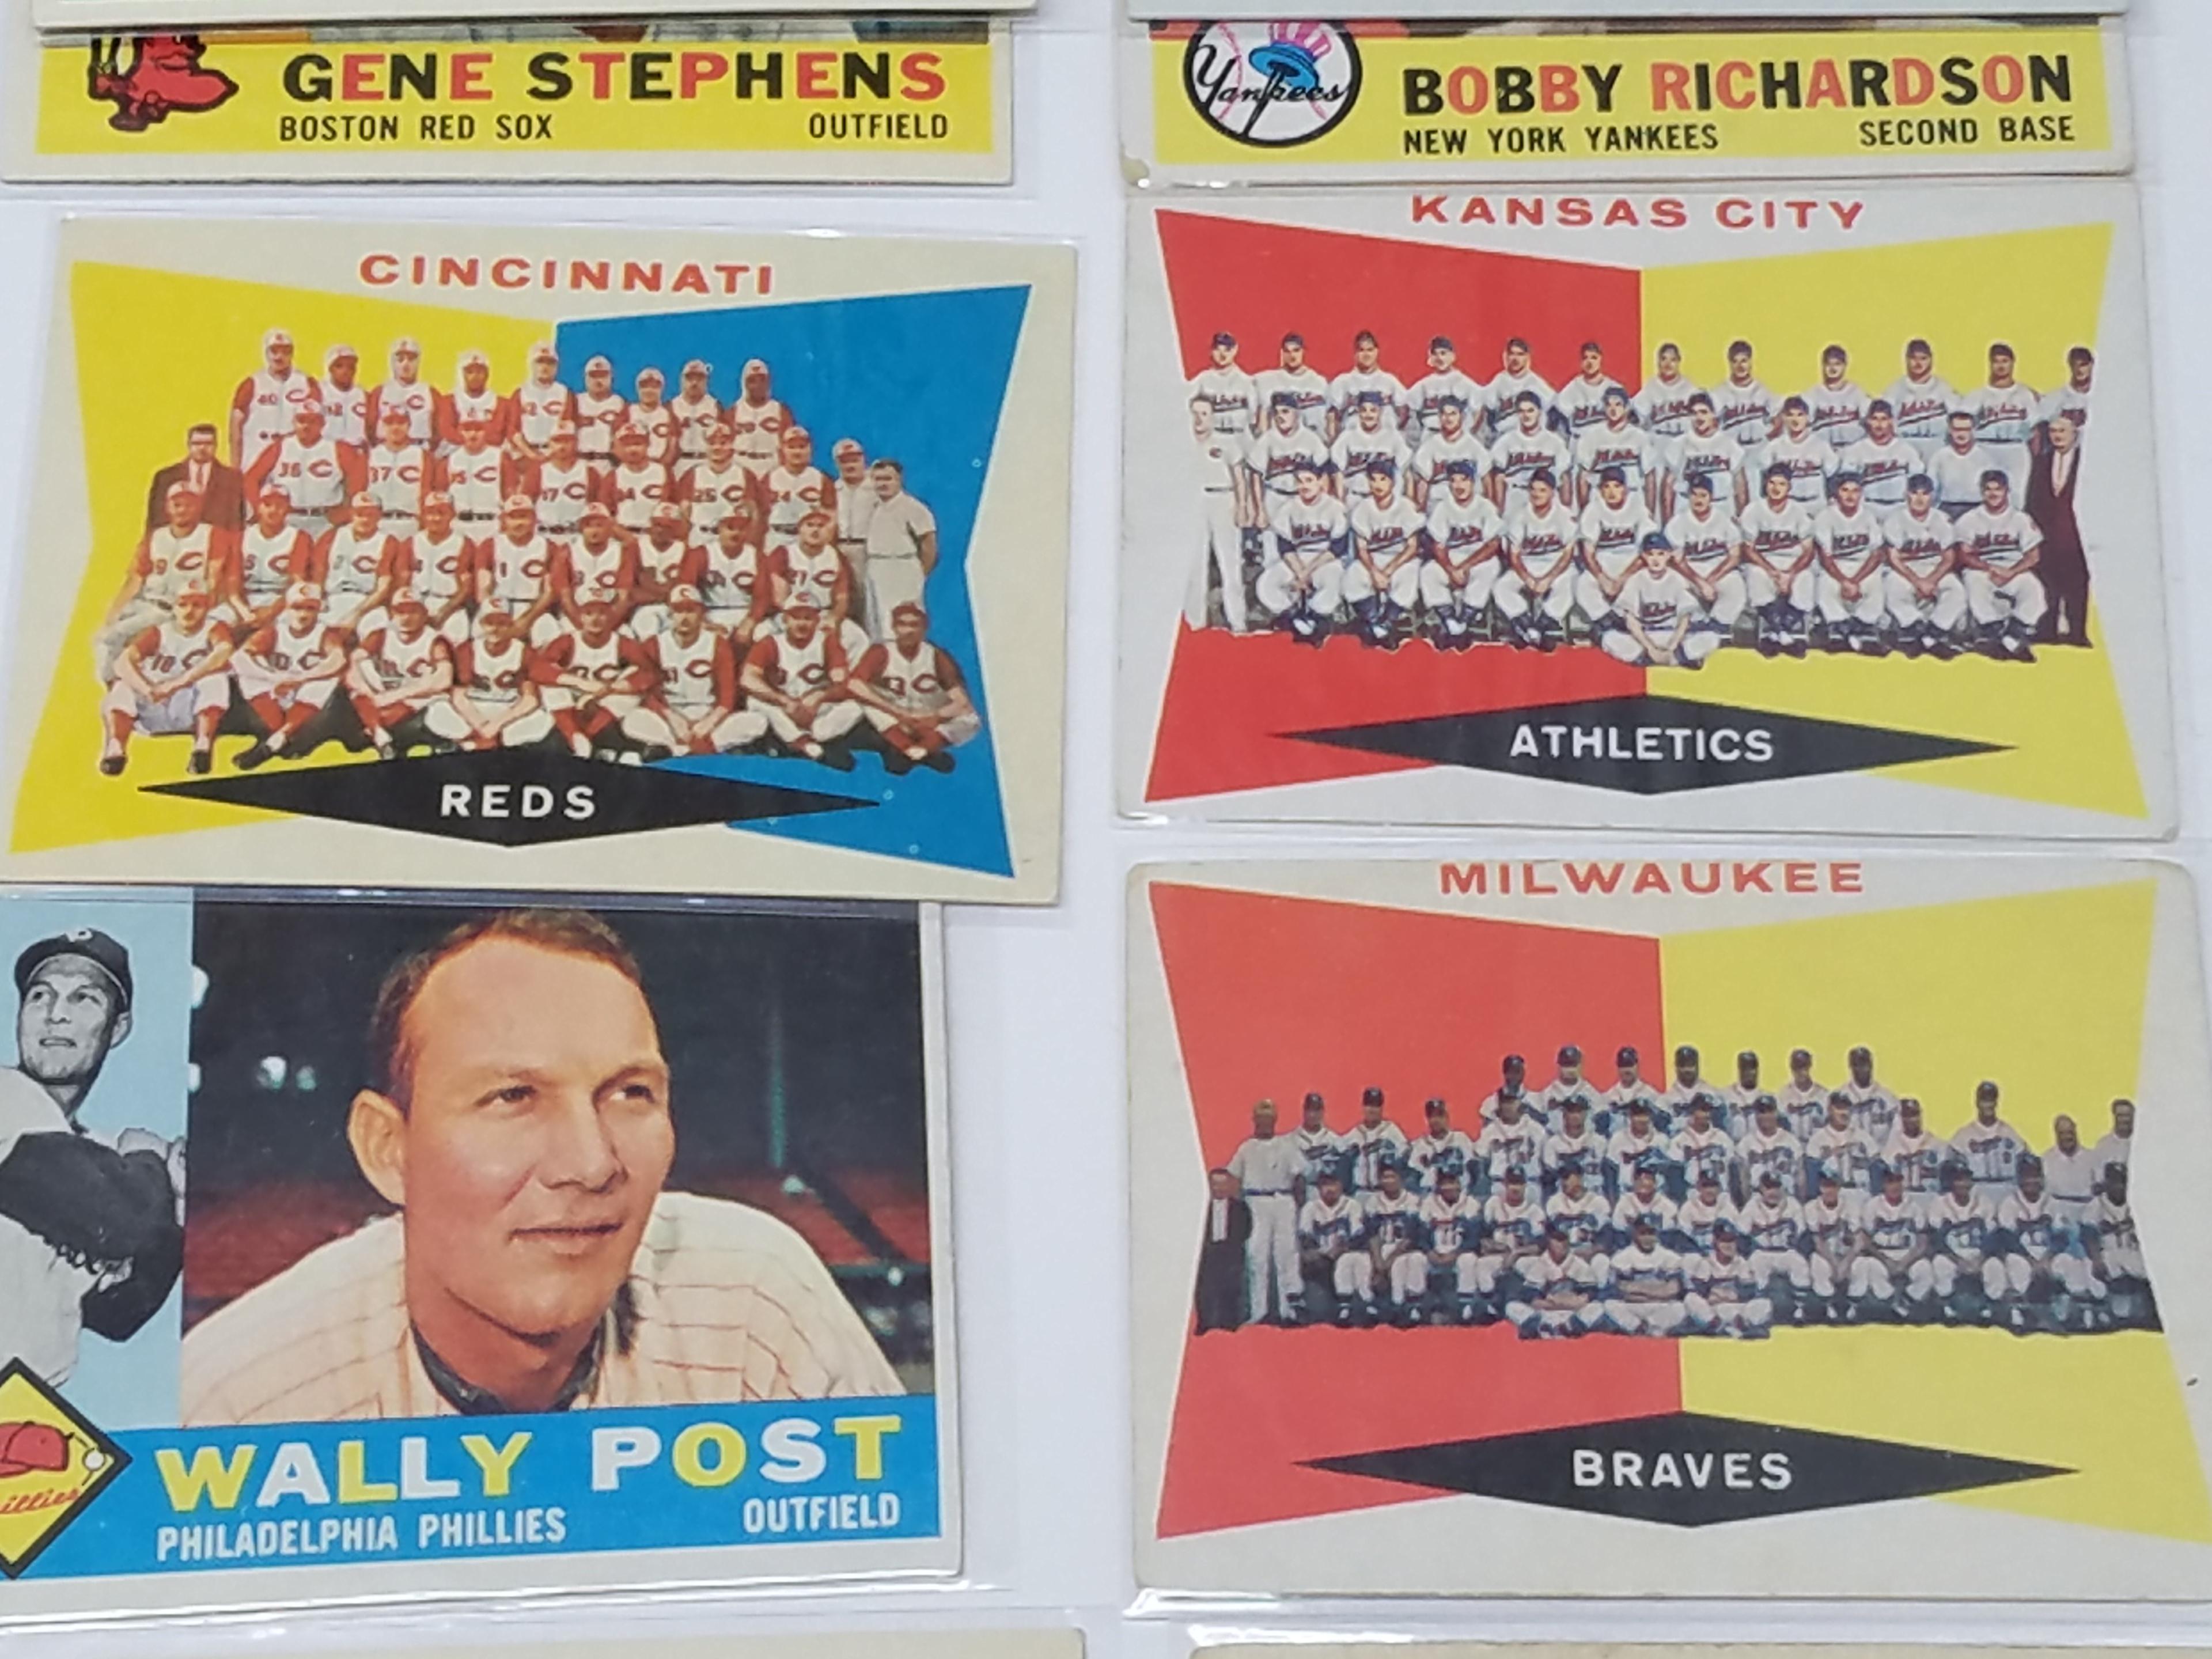 1960 TOPPS Partial Set. (453 cards) Range #1 to 572. EX to MT. agv is Near Mint. GREAT LOT. Includes